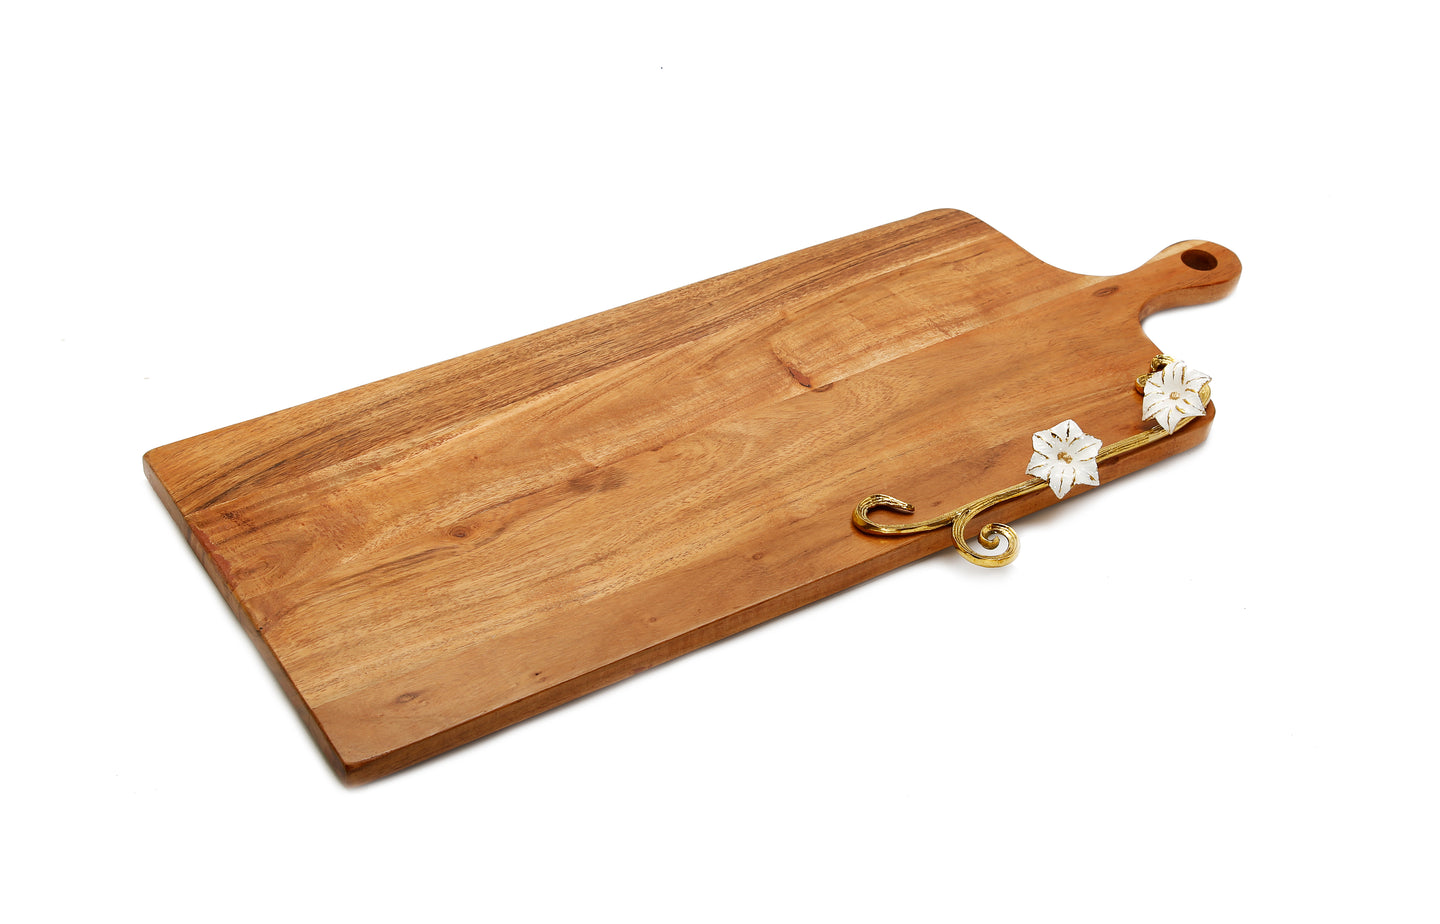 Wood Charcuterie Board Gold Flower Design with Handle flat base